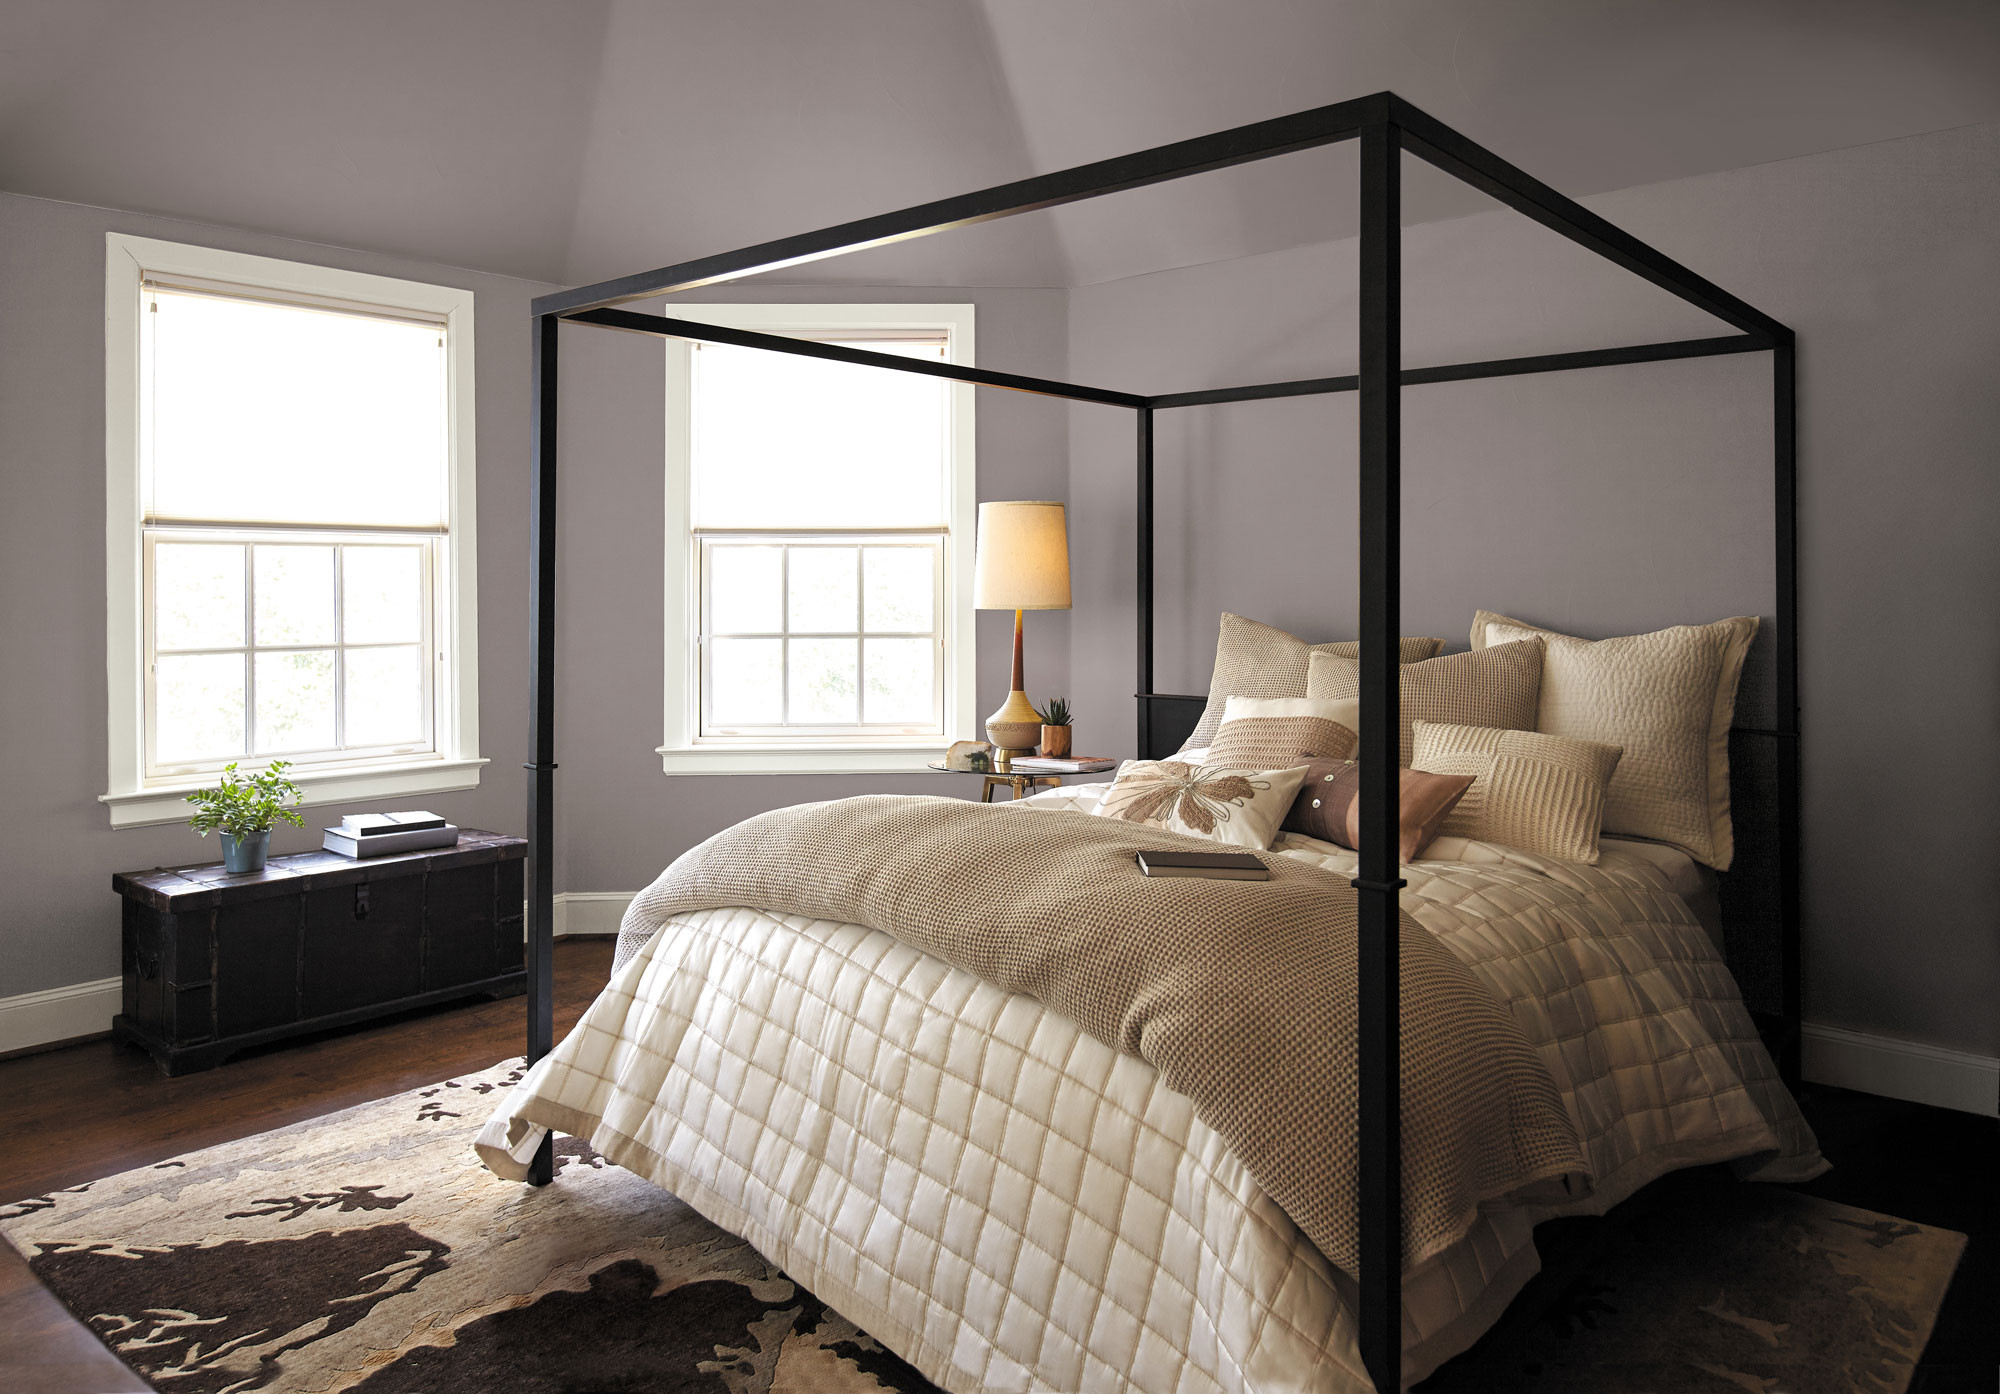 Behr Bedroom Colors
 Behr Color of the Year In the Moment